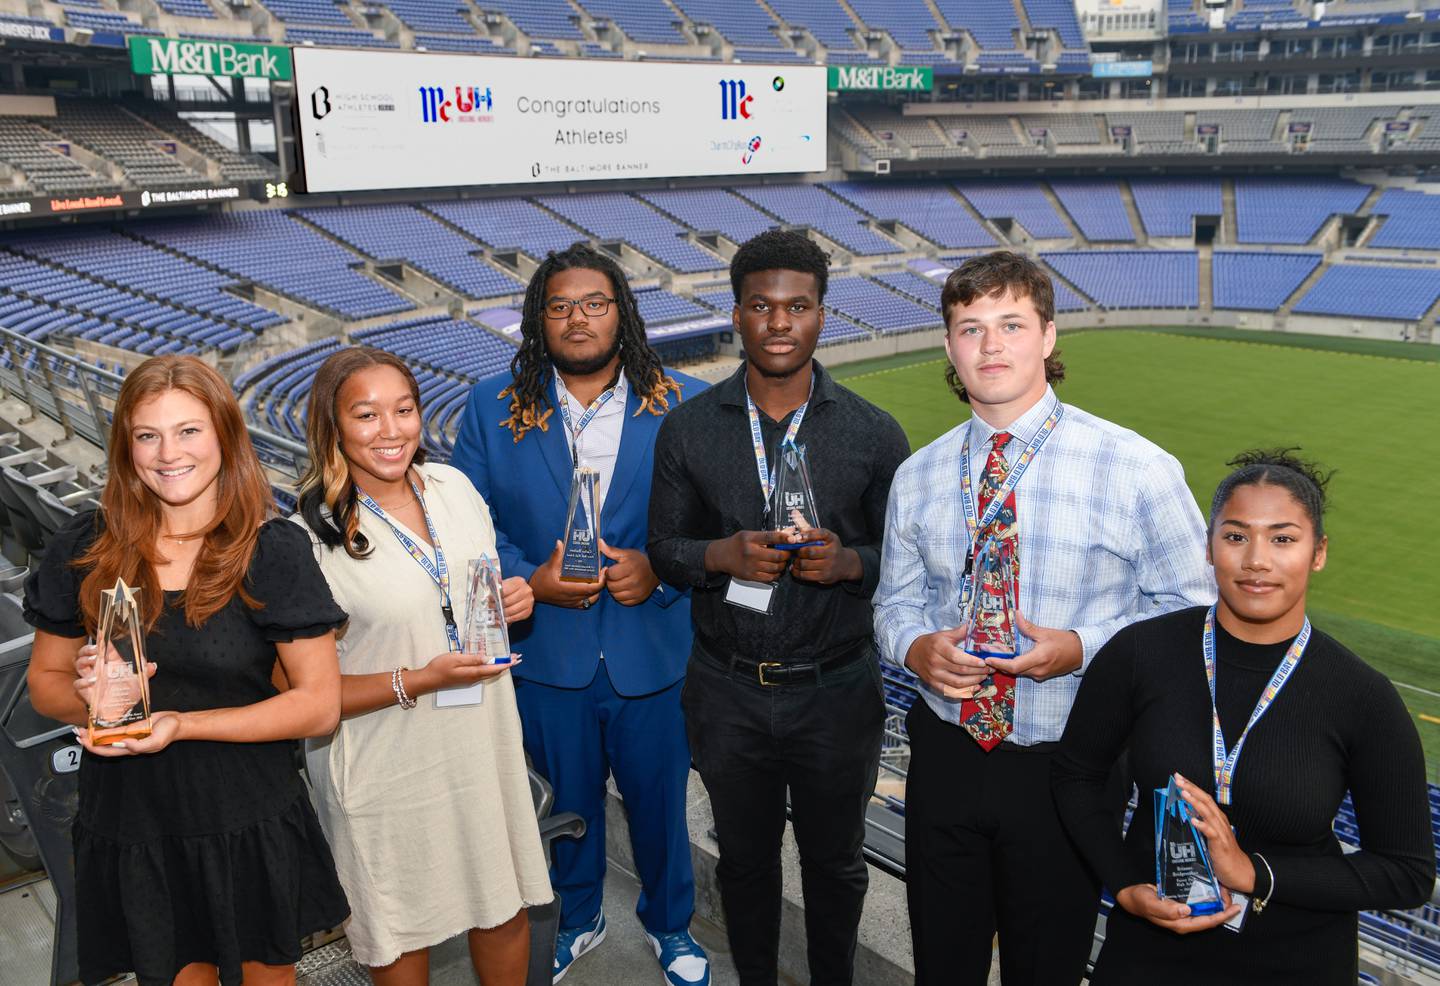 McCormick Unsung Heroes awardees Georgiana Benckini, from left, of Notre Dame Prep, Imani Groce, of Western Tech, Carter Herbert, of Perry Hall, Emmanuel Awogbesan, of Milford Mill, Adam Ossakow, of Hereford, and Brianna Bridgemohan, of Forest Park, stand together at The Baltimore BannerÕs High School Athlete Awards and McCormickÕs Unsung Heroes event at M&T Bank Stadium in Baltimore, Wednesday, June 7, 2023.